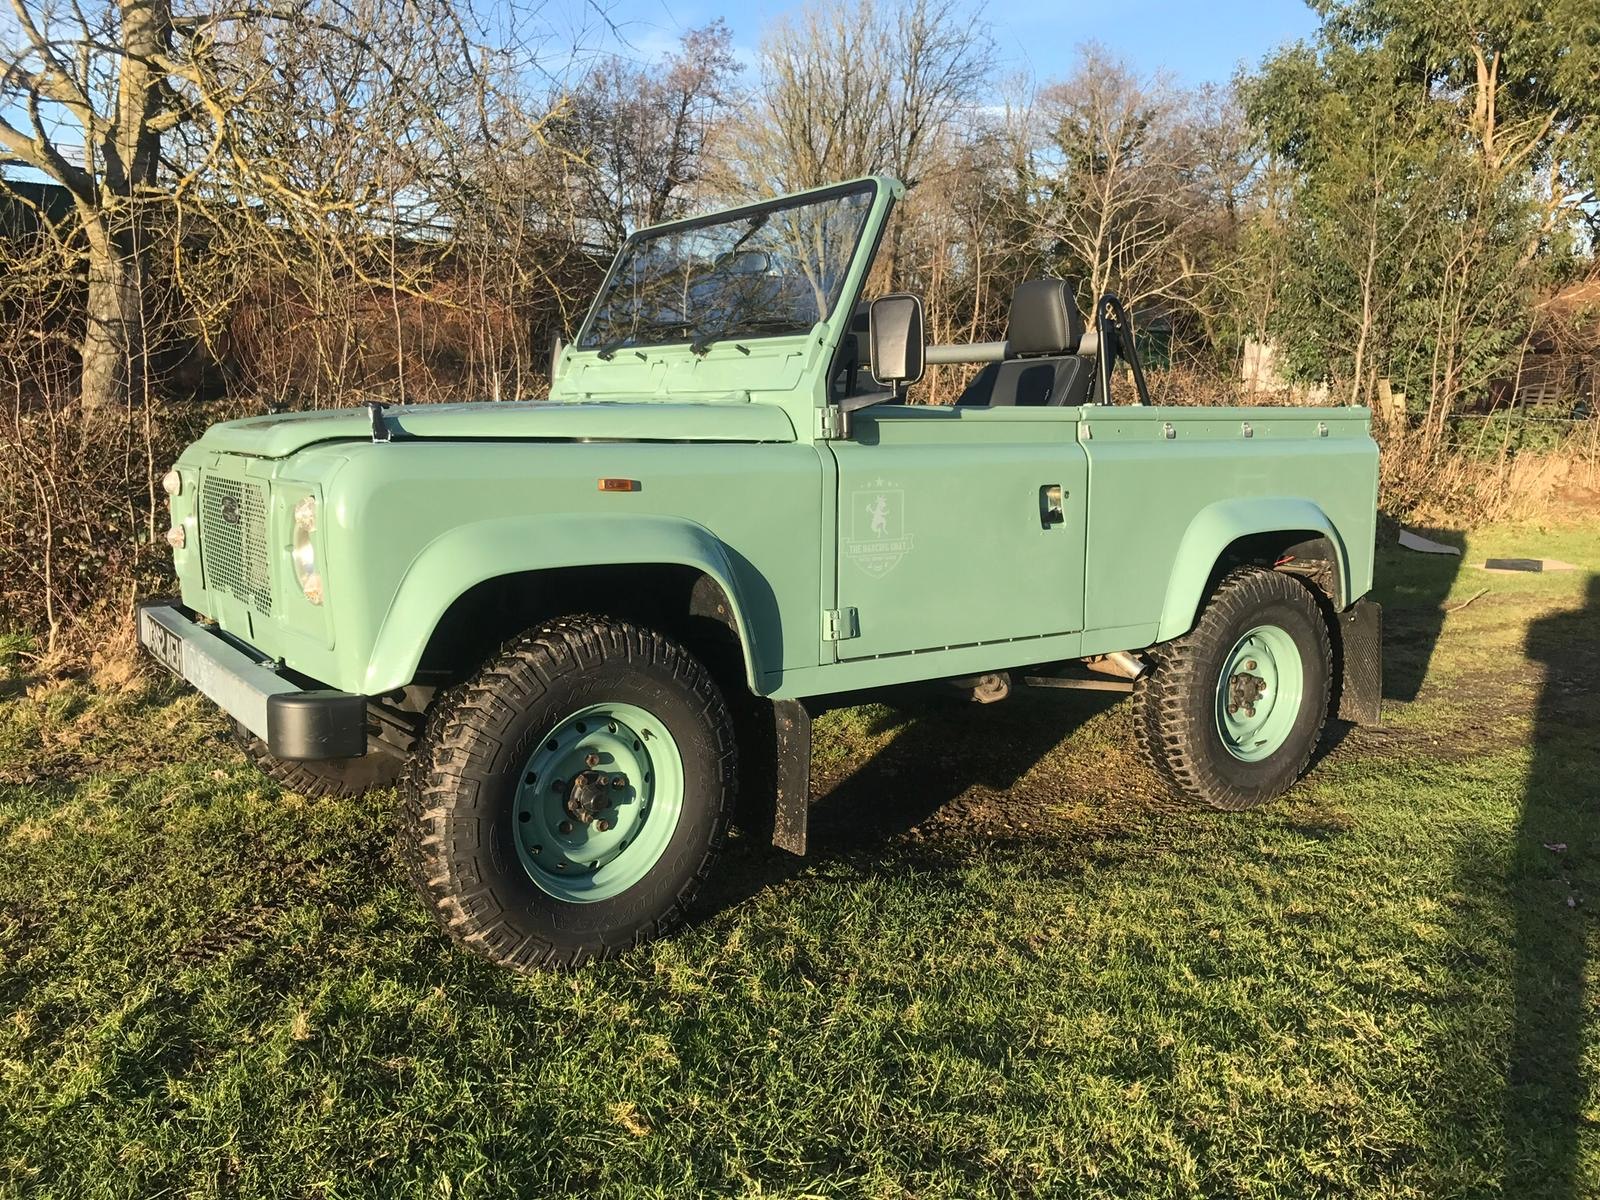 Are Land Rovers Easy To Restore?